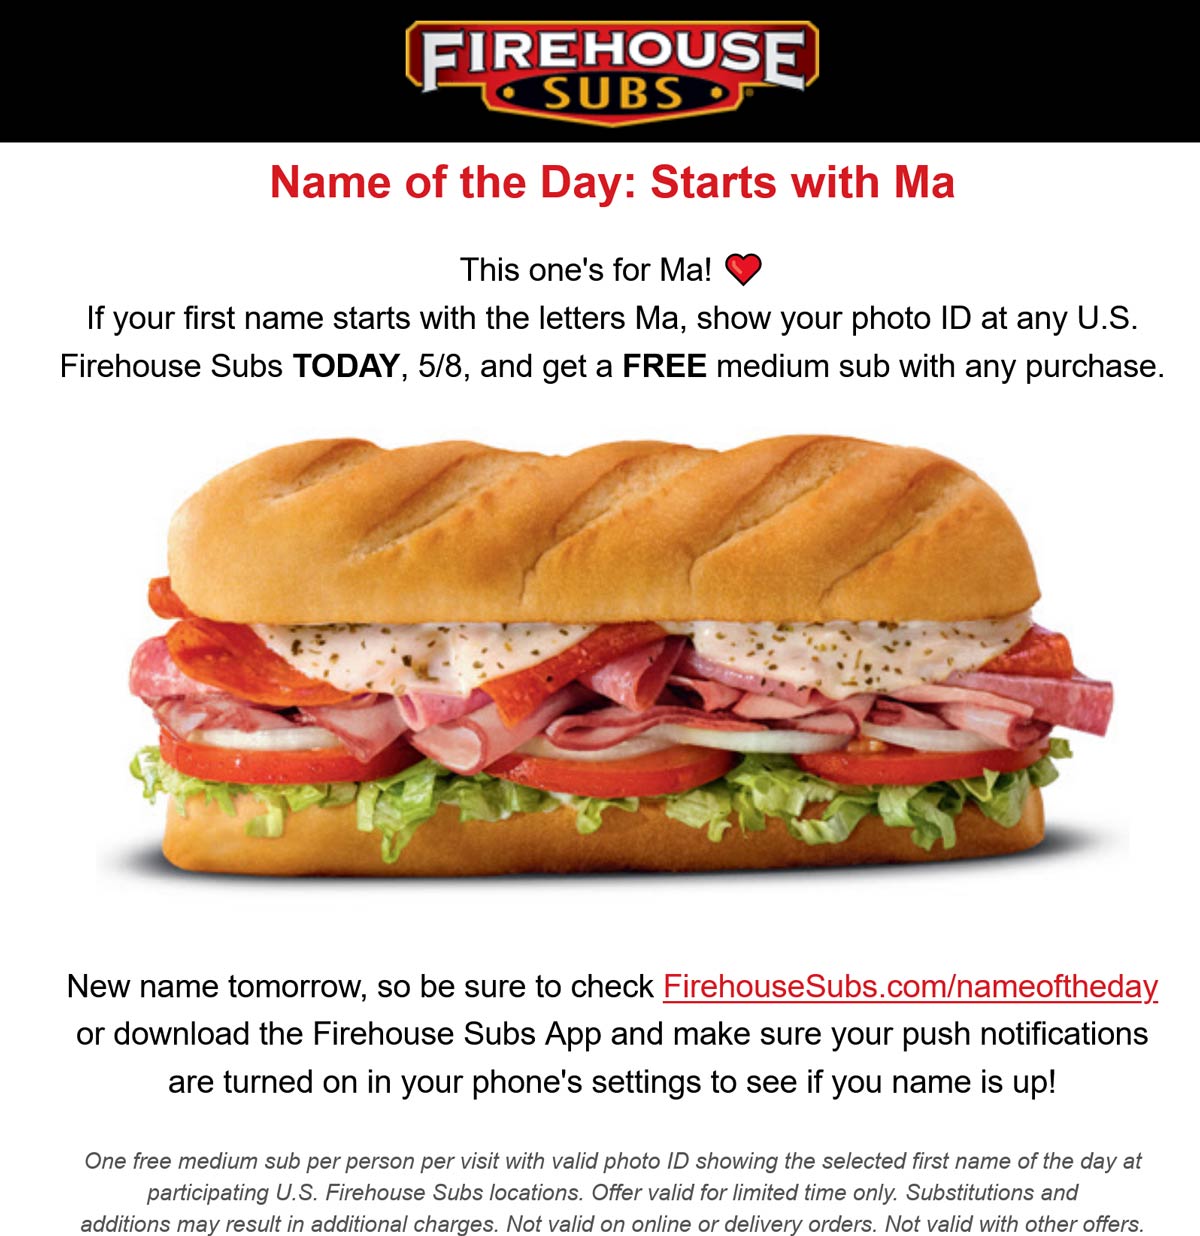 Firehouse Subs restaurants Coupon  Free sub sandwich for names that begin with Ma today at Firehouse Subs #firehousesubs 